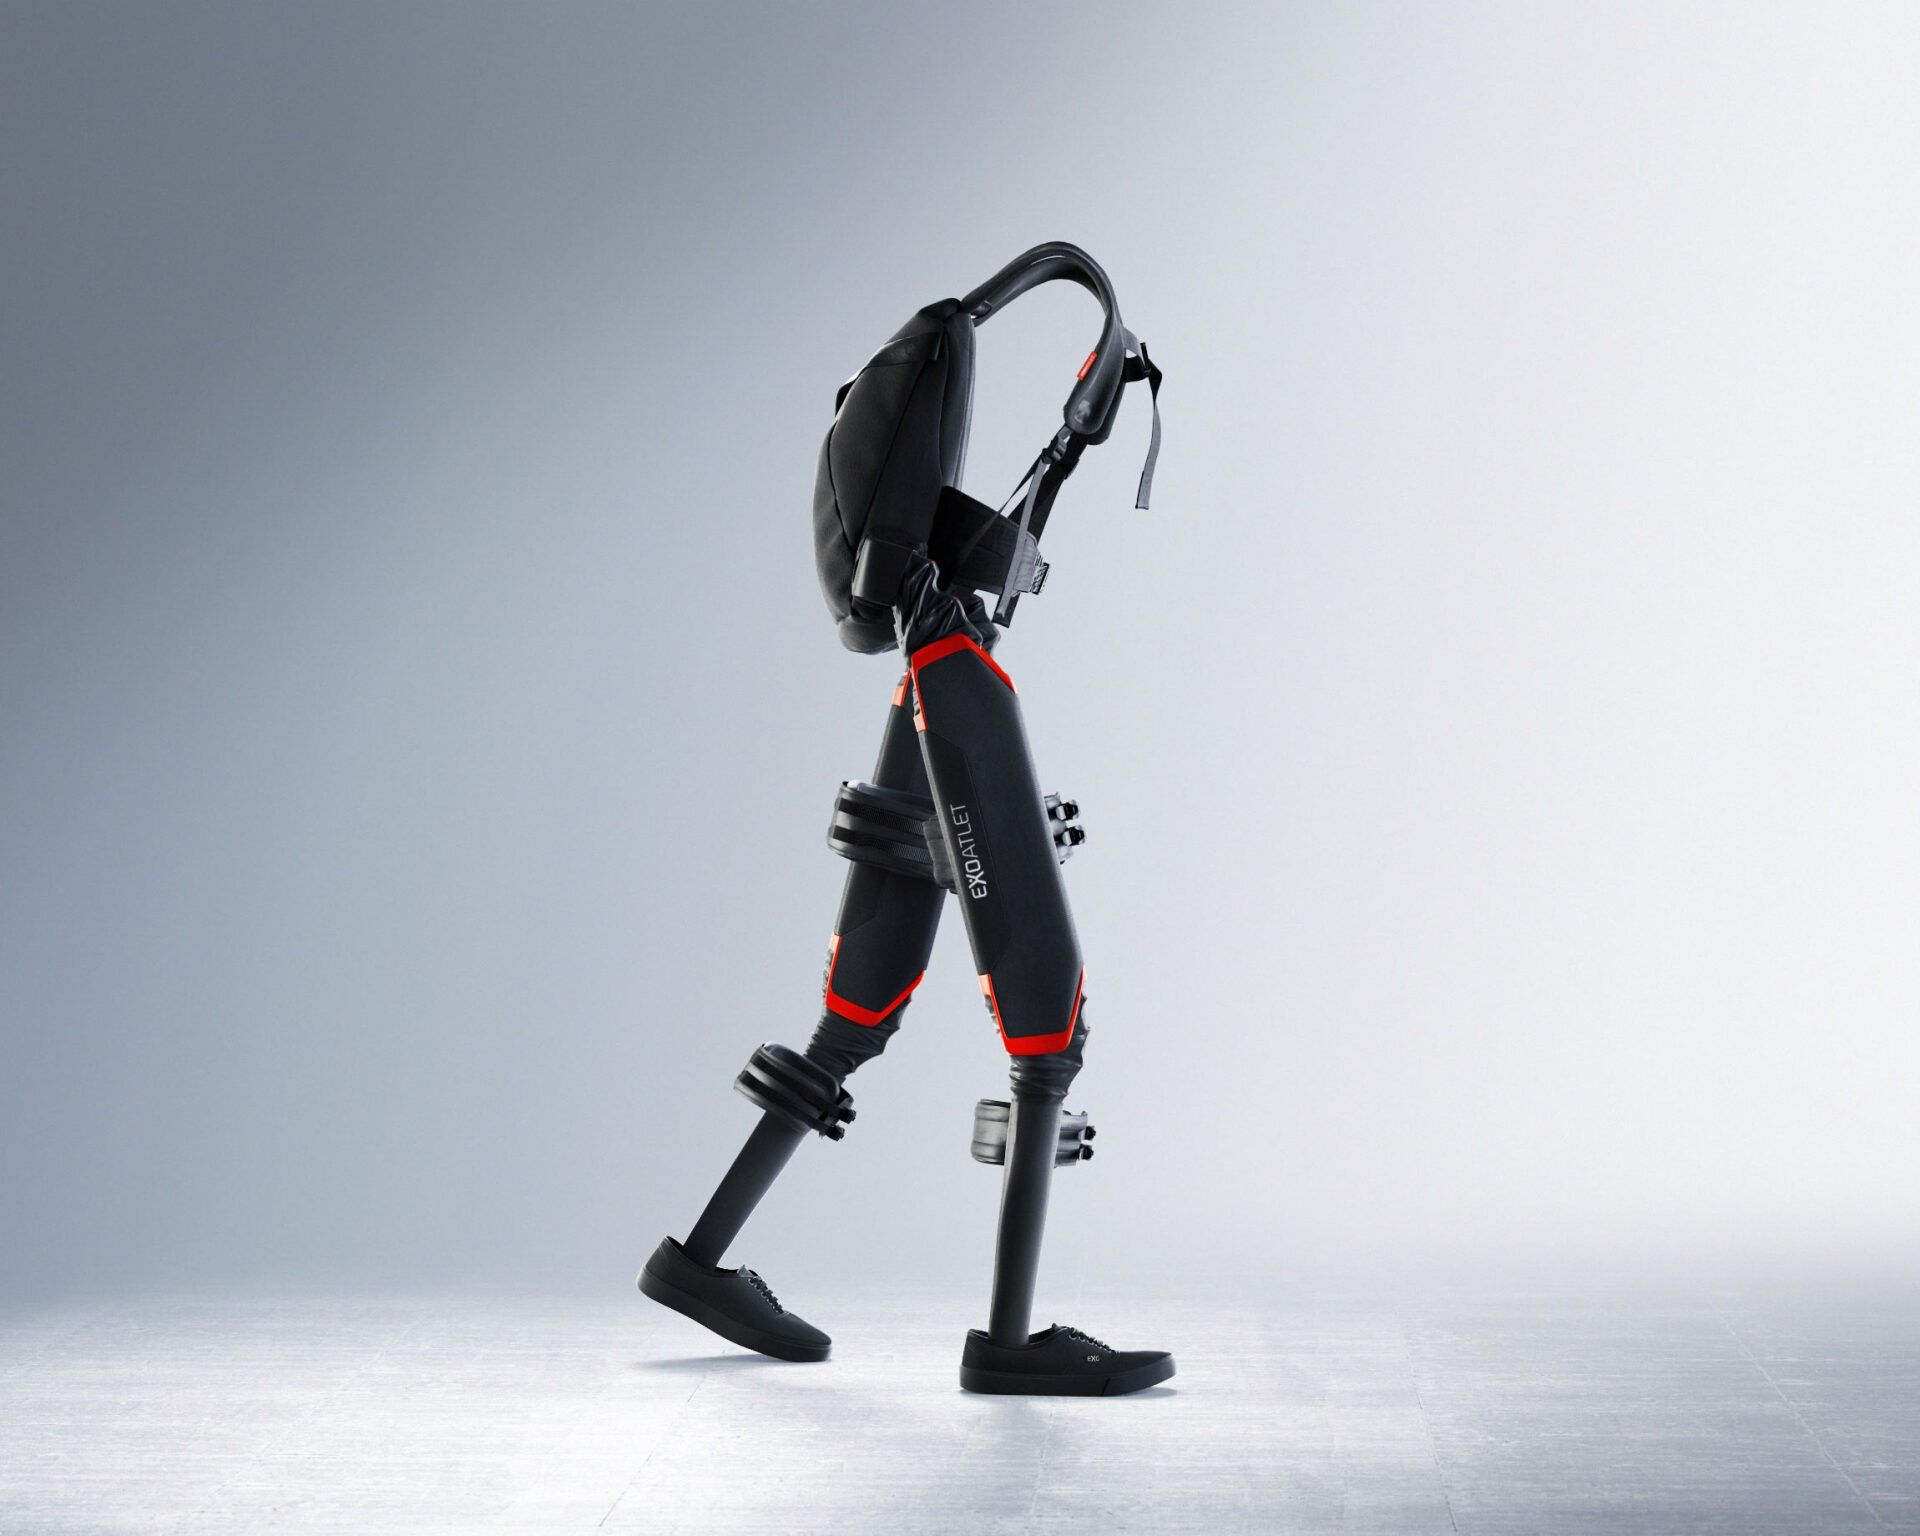 A robot exoskeleton is walking with a backpack on its back.